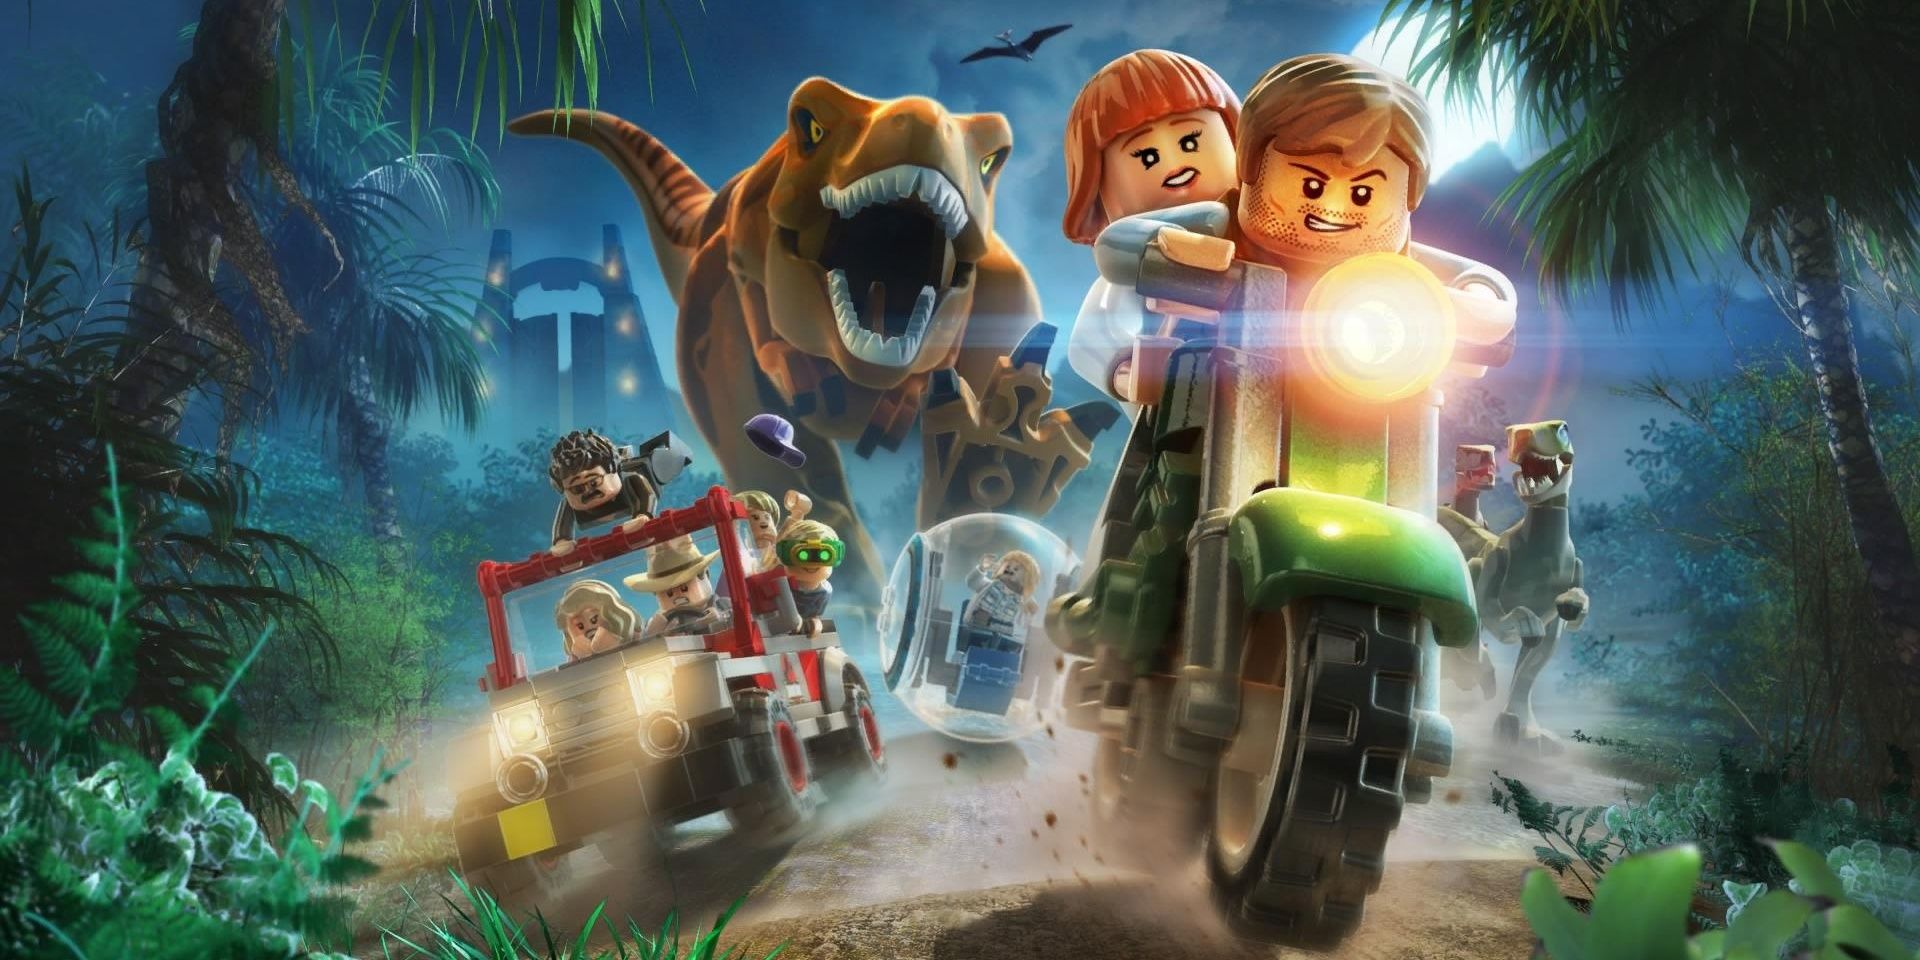 Characters in Lego Jurassic World